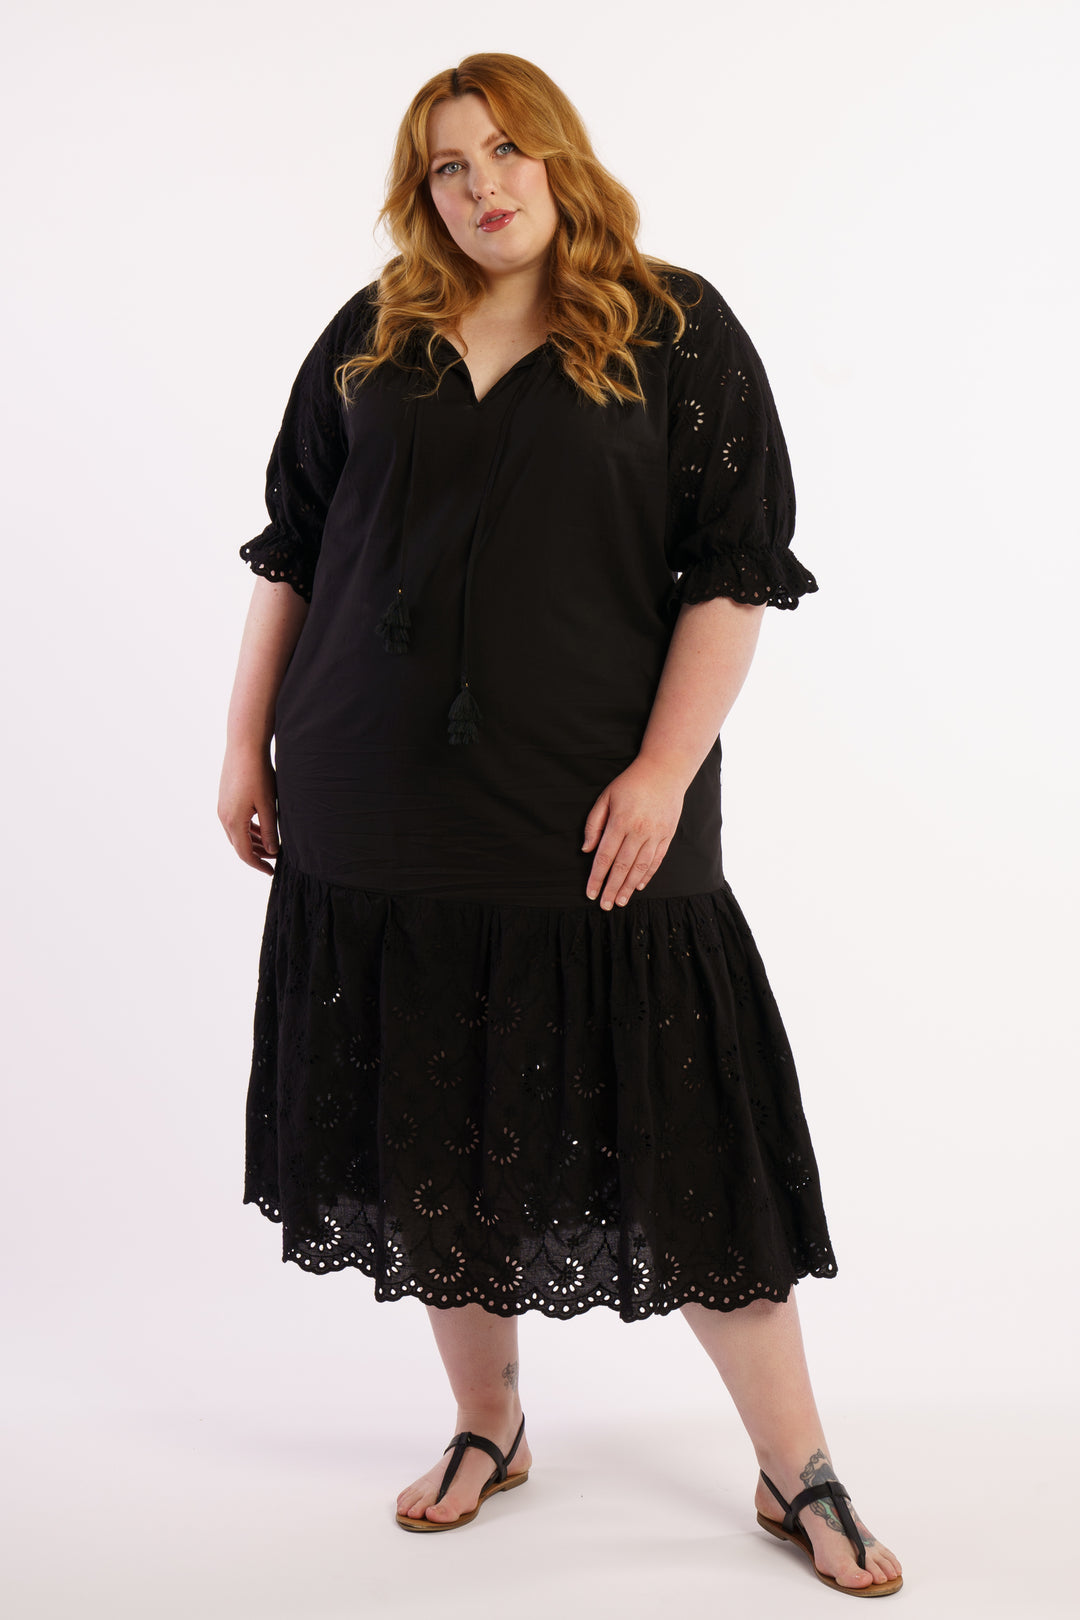 Summer Breeze Broidery Dress - Black - STOCK AVAILABLE - SIZE XS (12/14) & S (14/16)